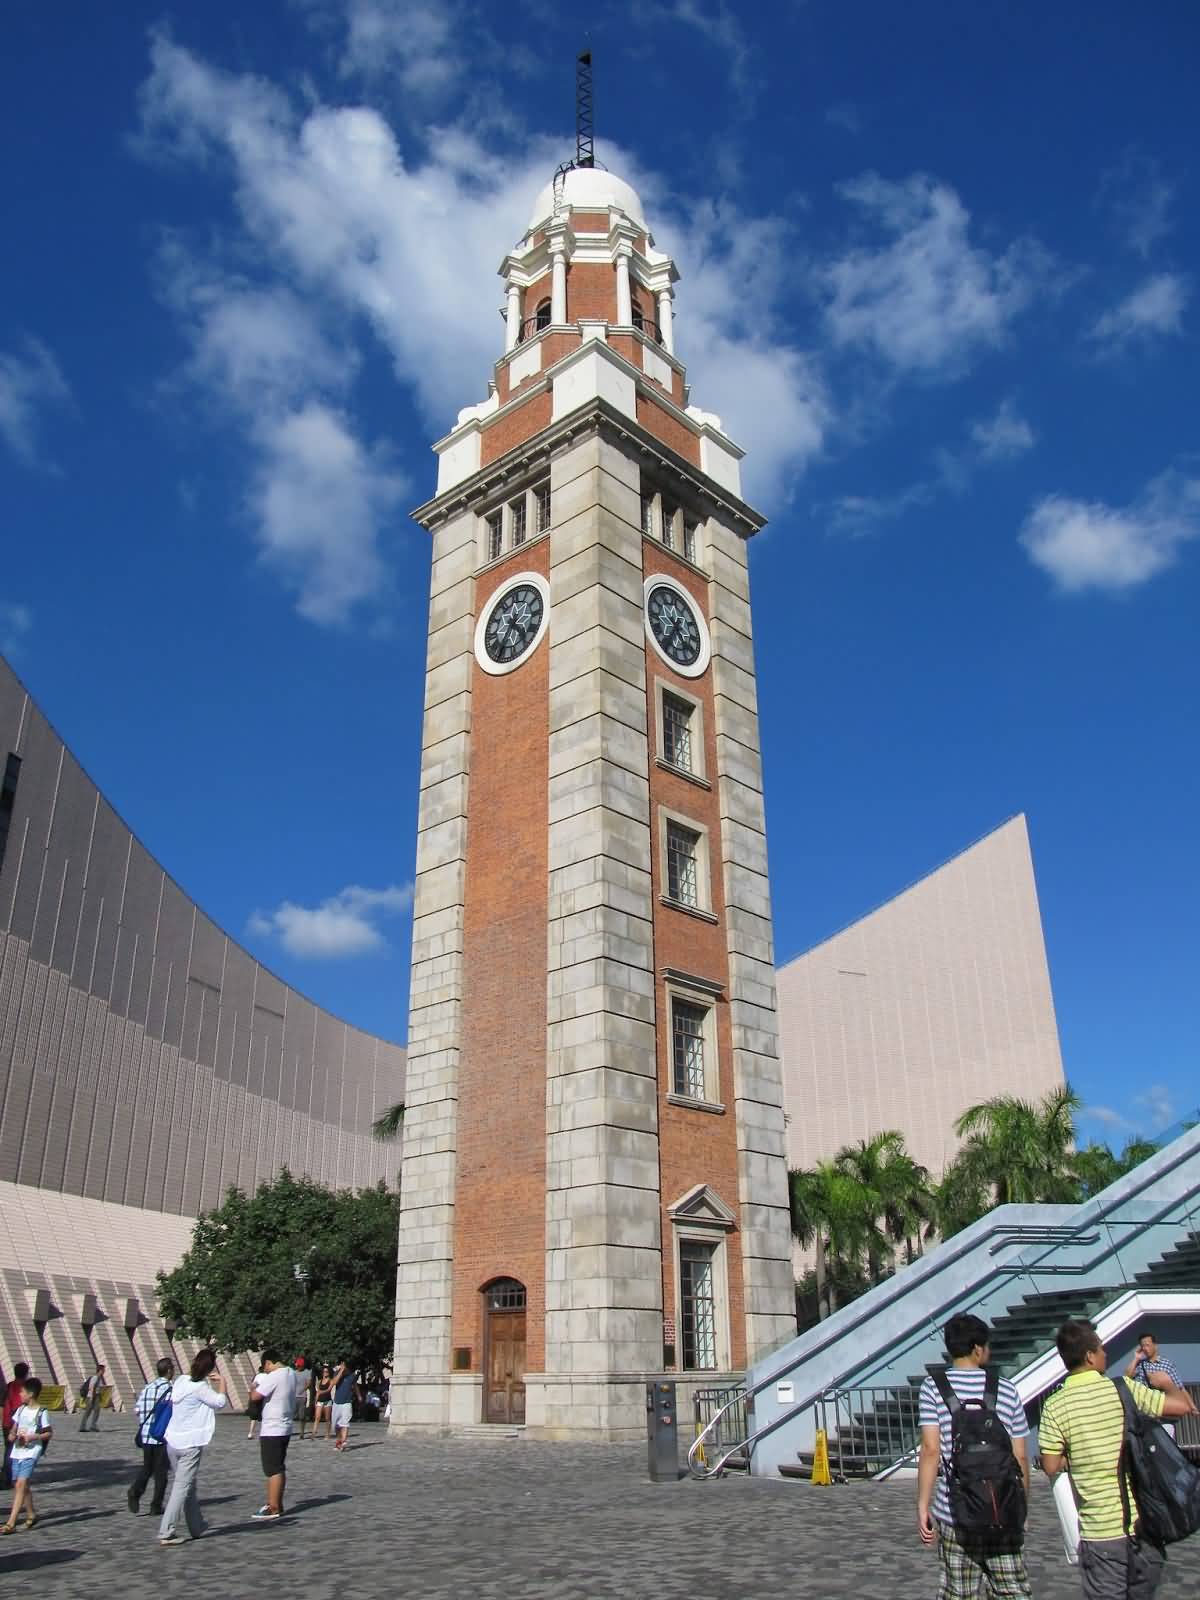 Back View Of Clock Tower